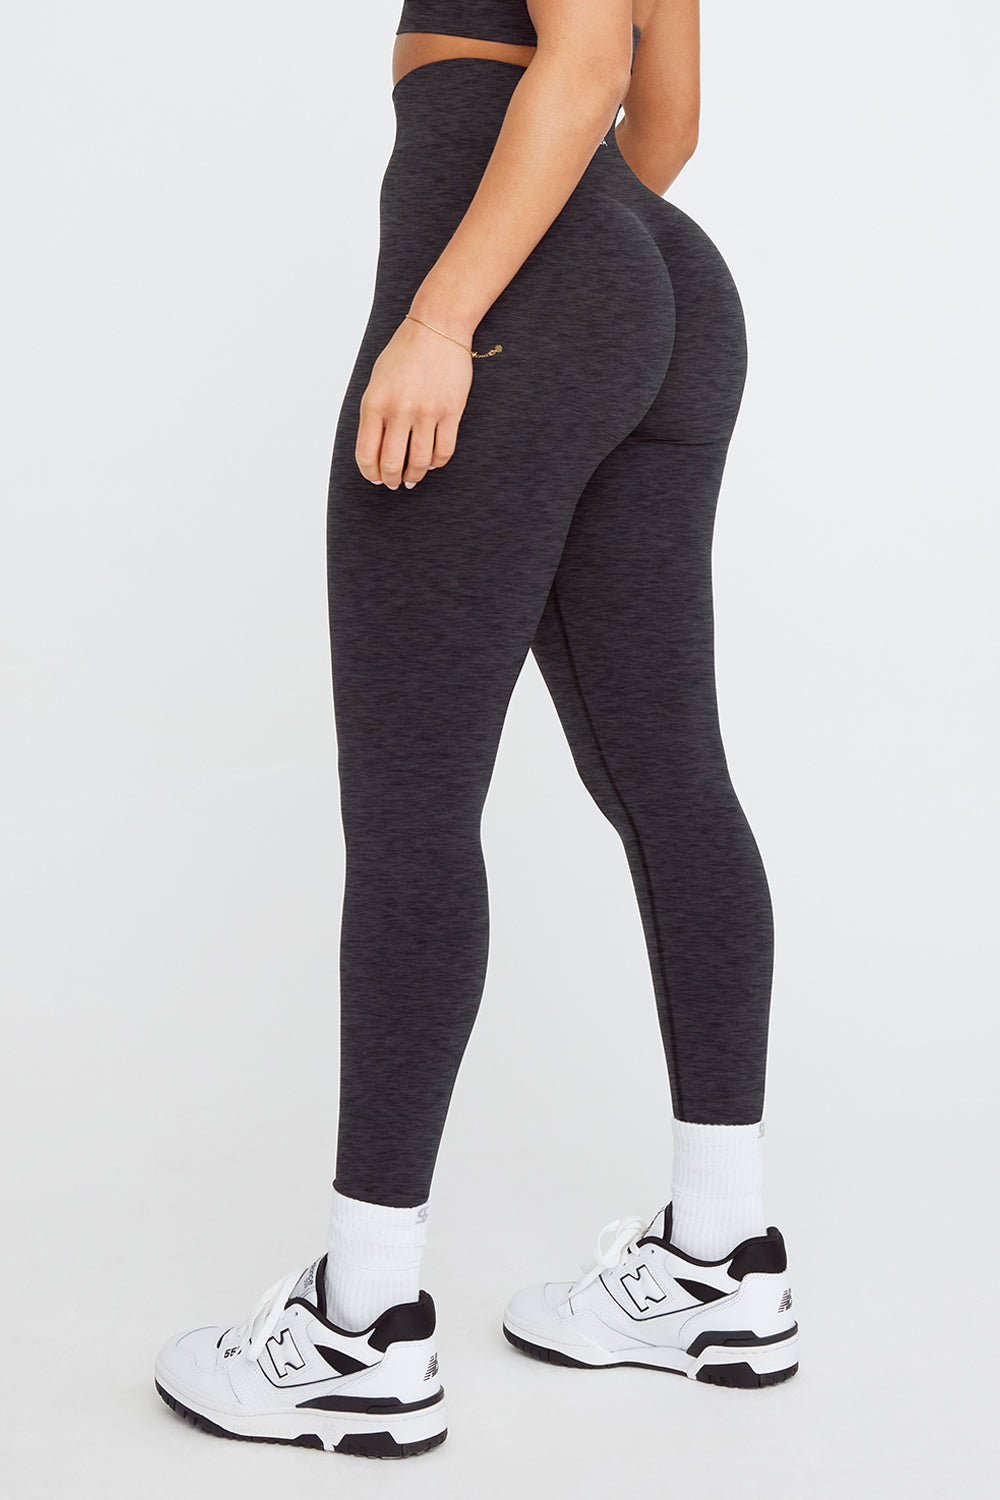 ECHT, Pants & Jumpsuits, Echt Highwaist Cropped Black And White Speckled Legging  Tights